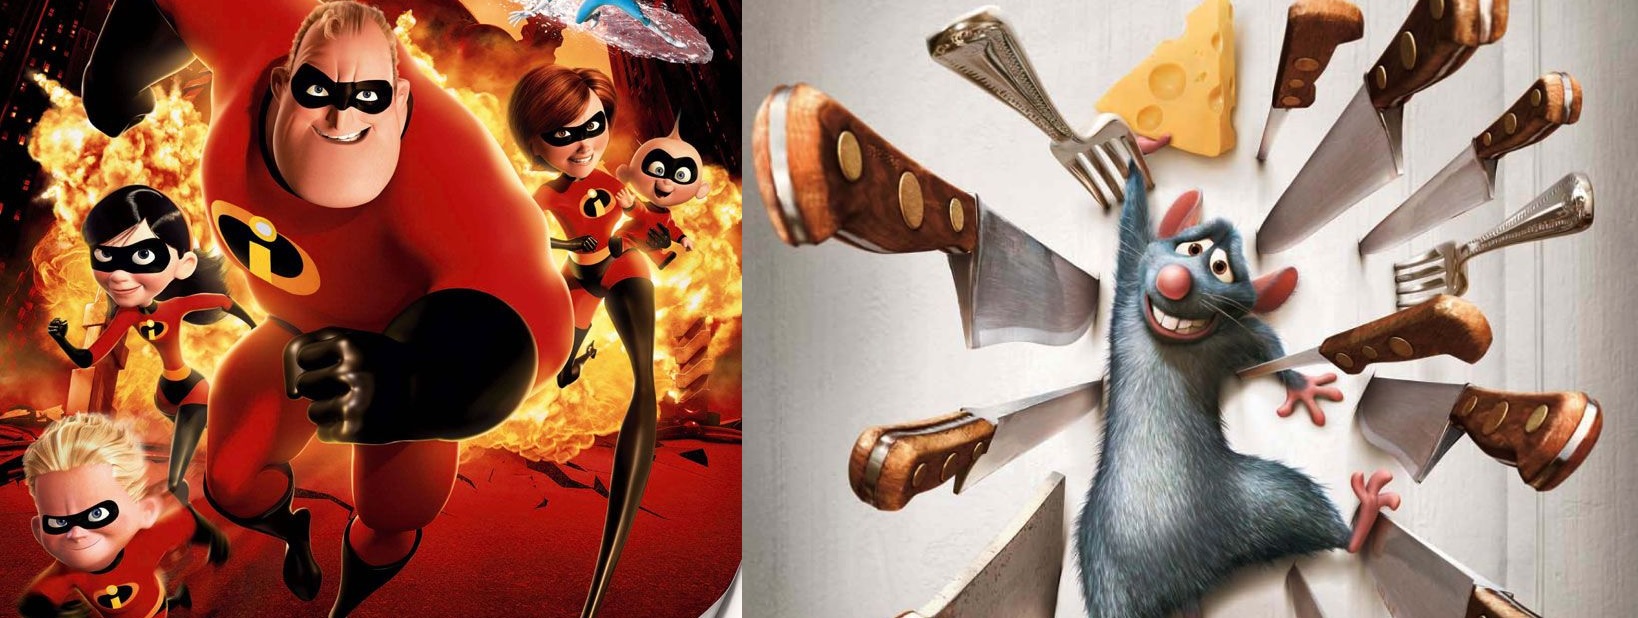 The-Incredibles-and-Ratatouille-set-for-3D-Re-Releases